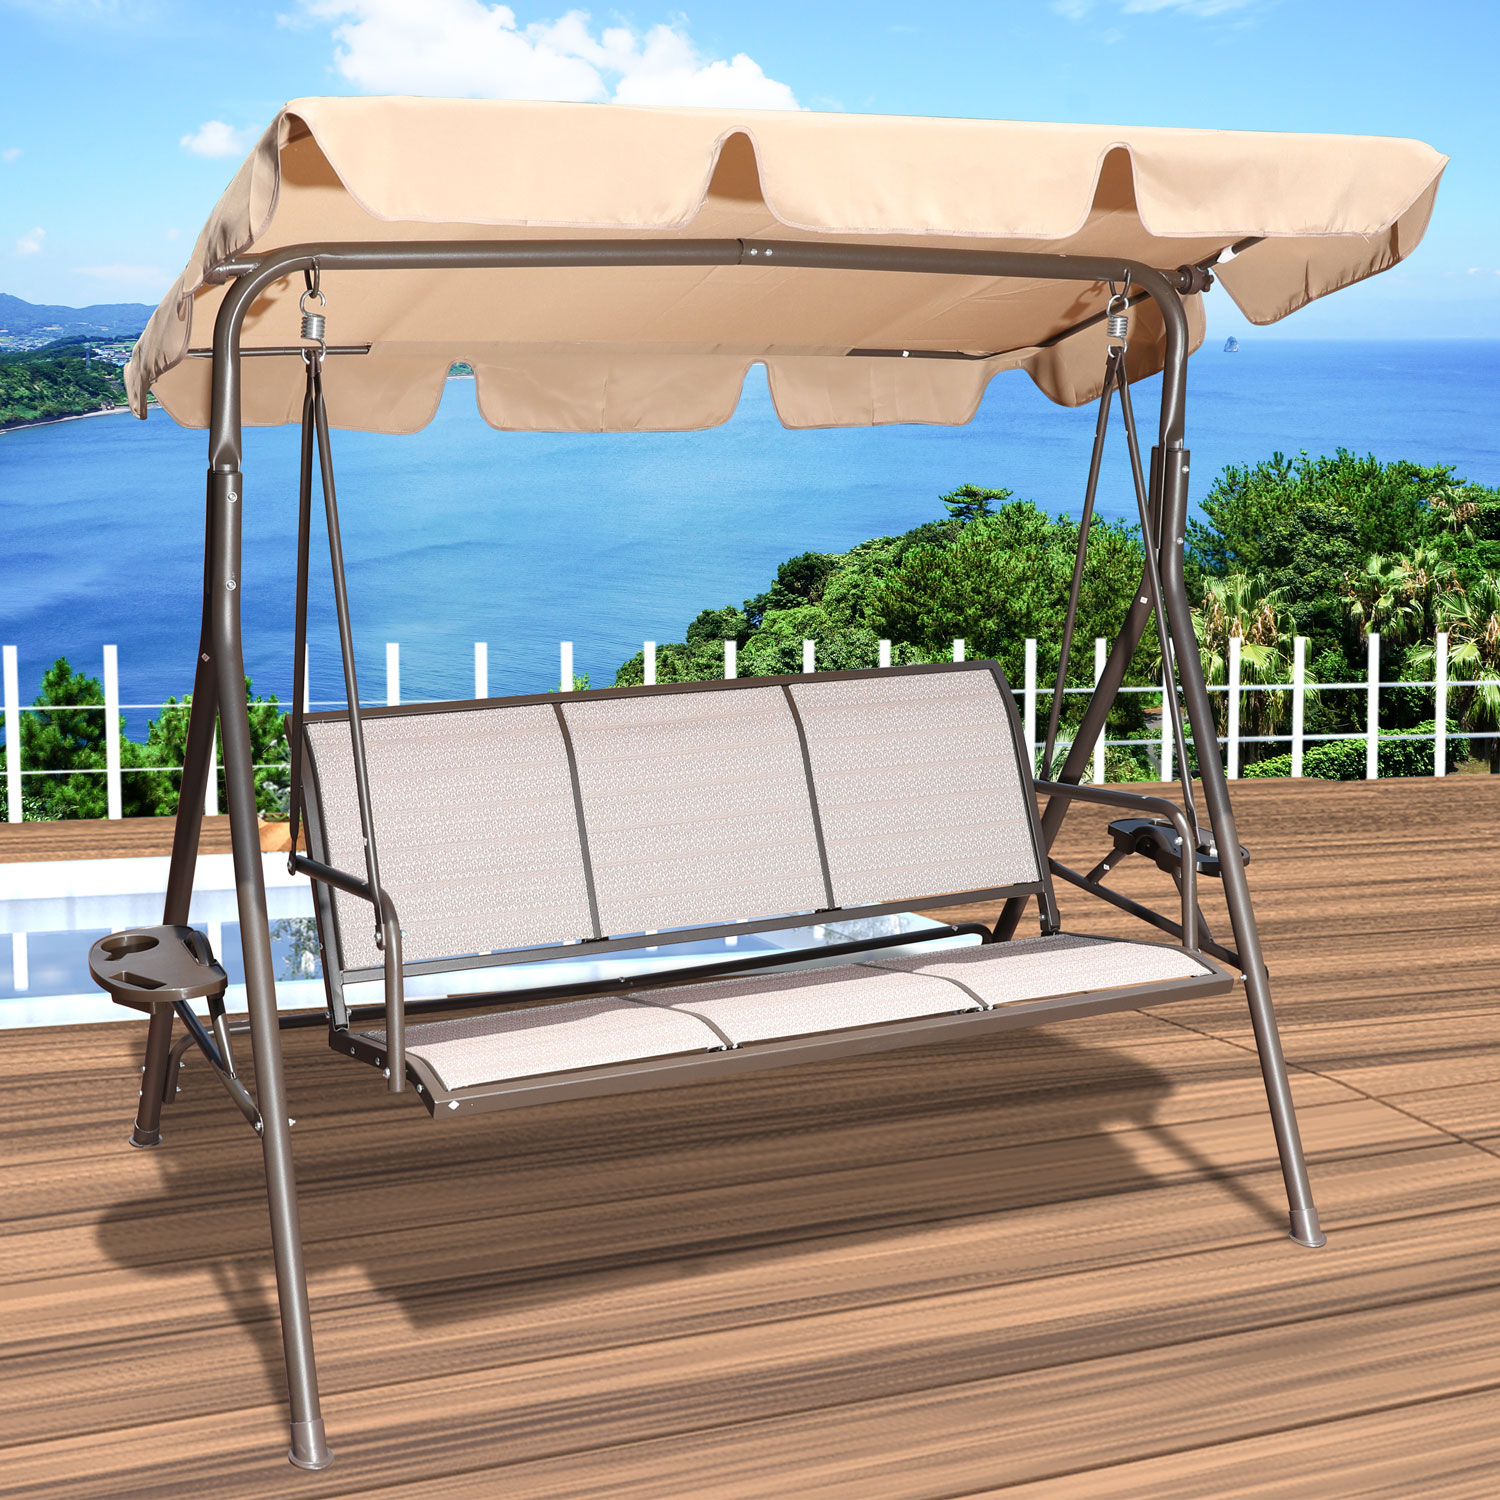 3 Person Beige Patio Swing Seat with Adjustable Canopy, All Weather Resistant Hammock Swinging Chair Bench - image 1 of 11